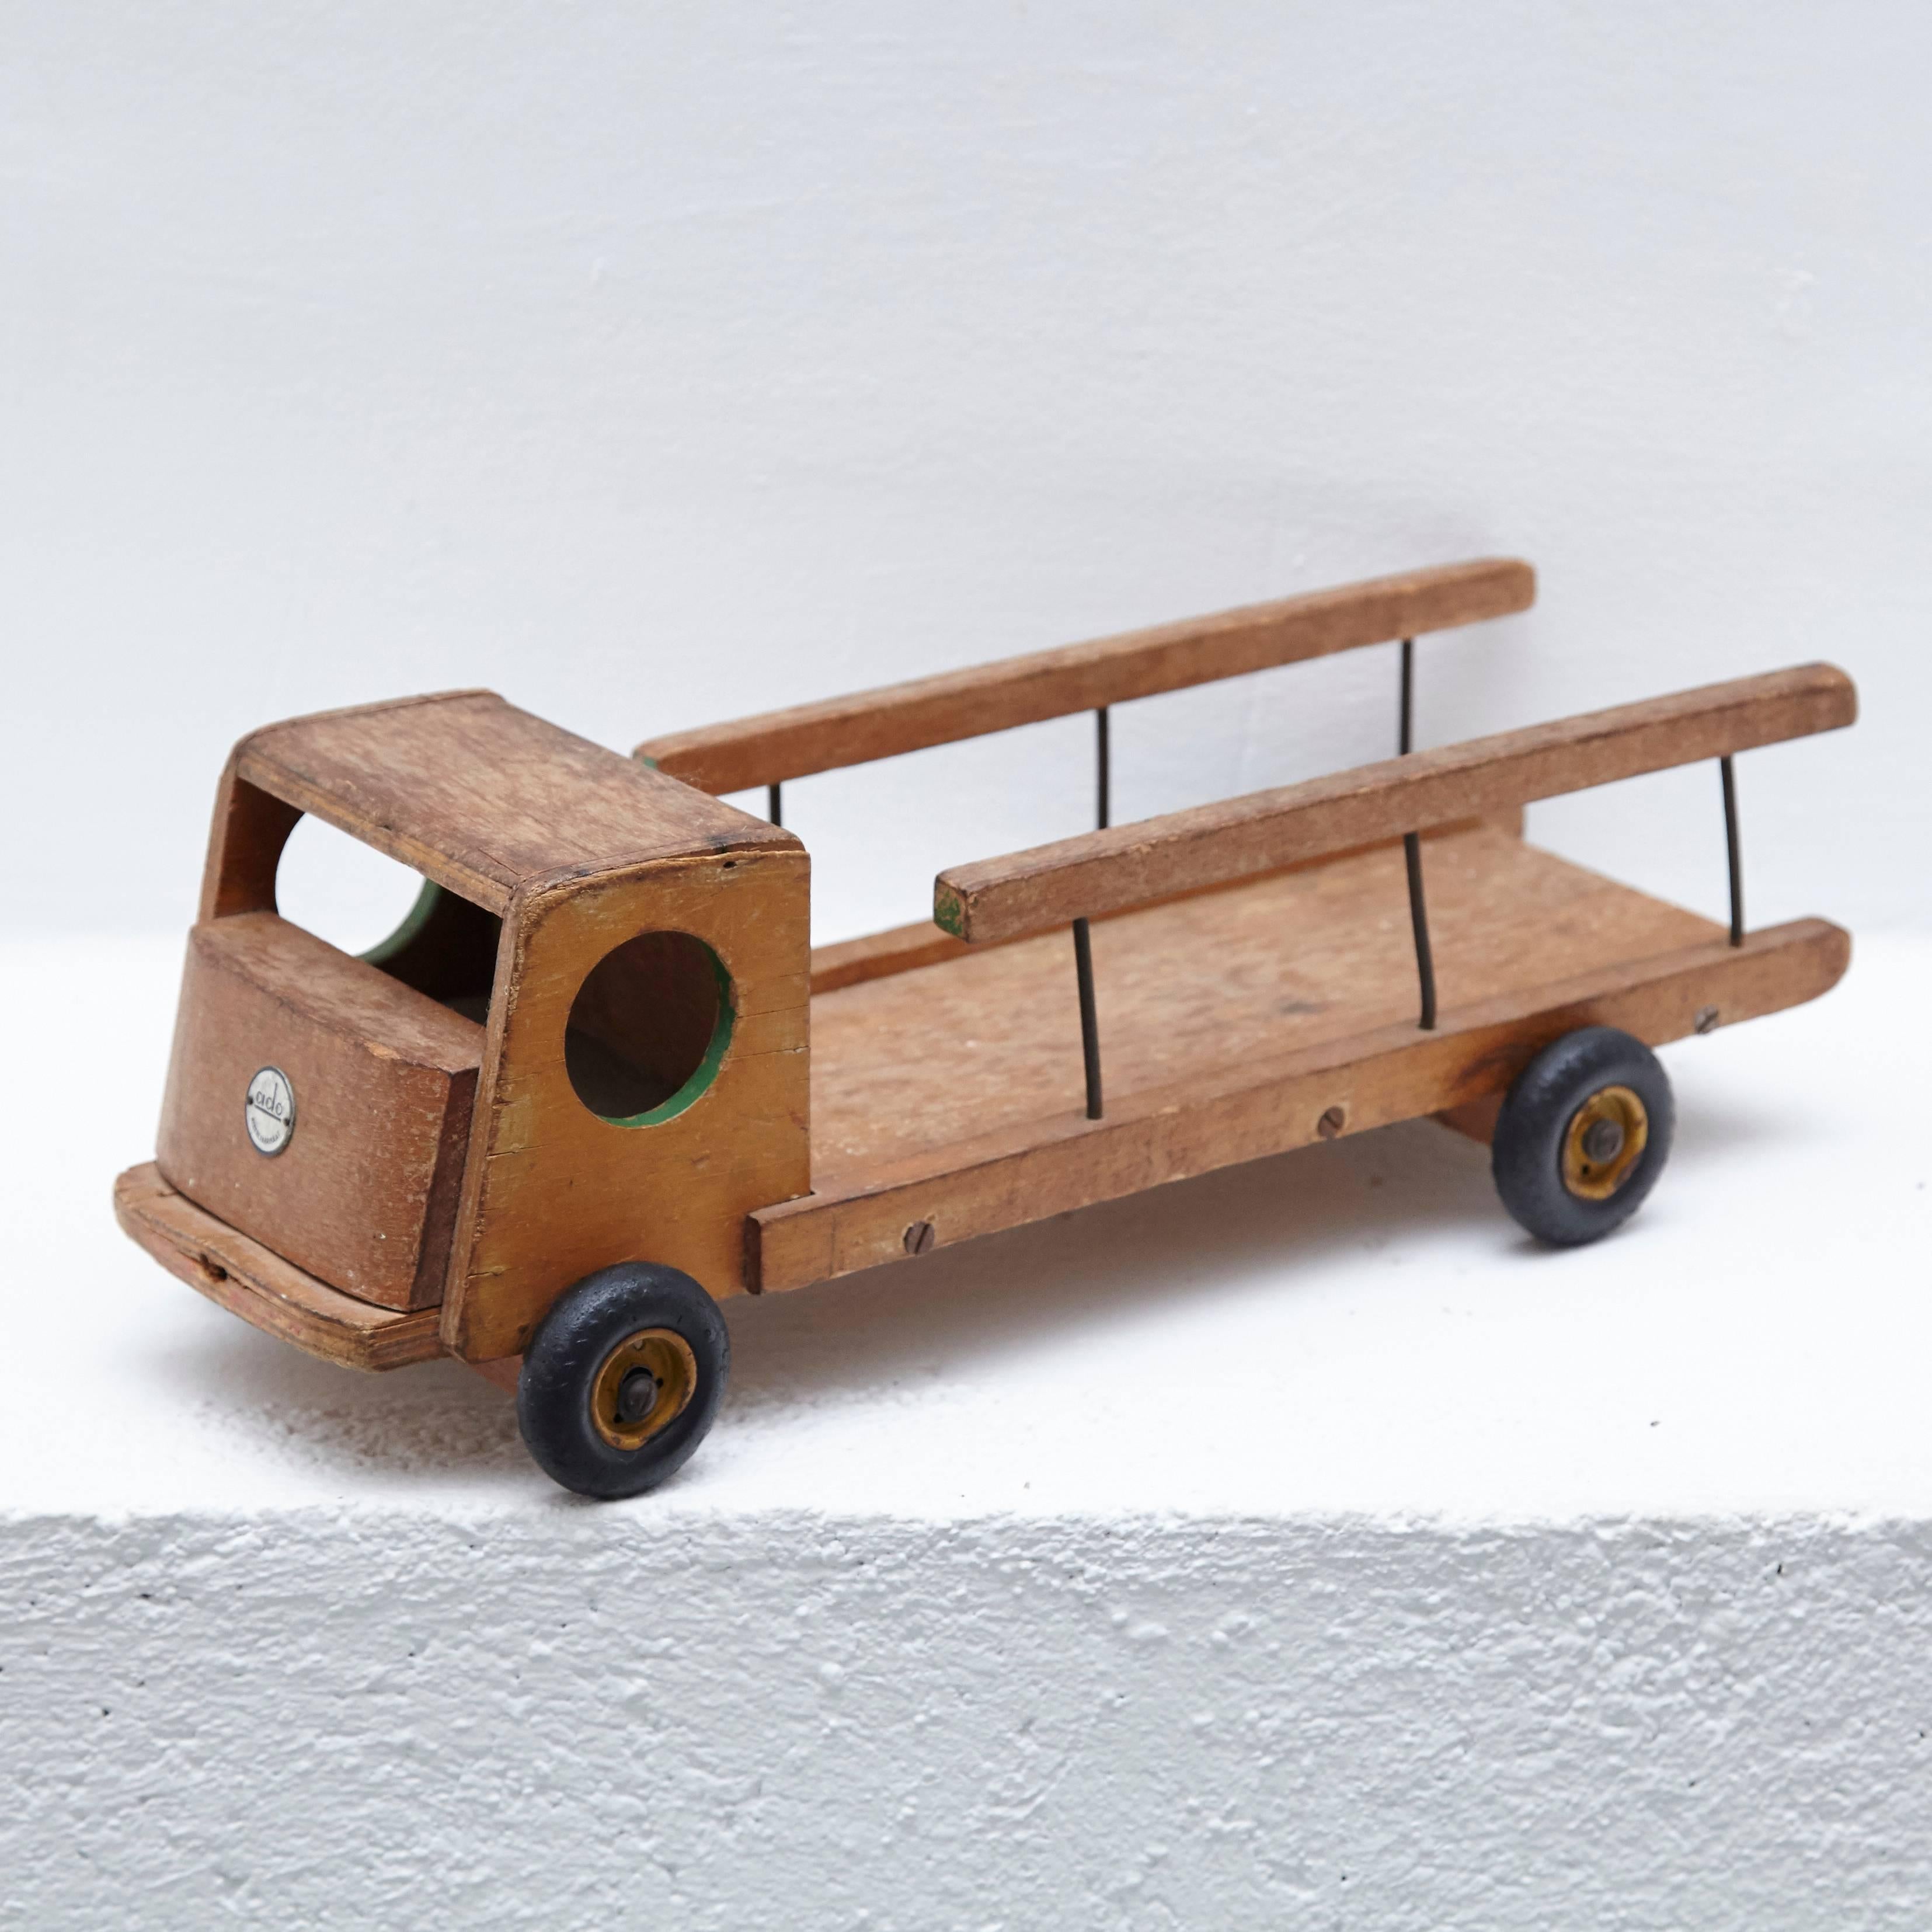 Very rare and early wooden toy truck designed by Ko Verzuu for Ado Holland in 1940.

In good original condition, with minor wear consistent with age and use, preserving a beautiful patina. 


Ko Verzuu
Utrecht 1901–1971
Construction